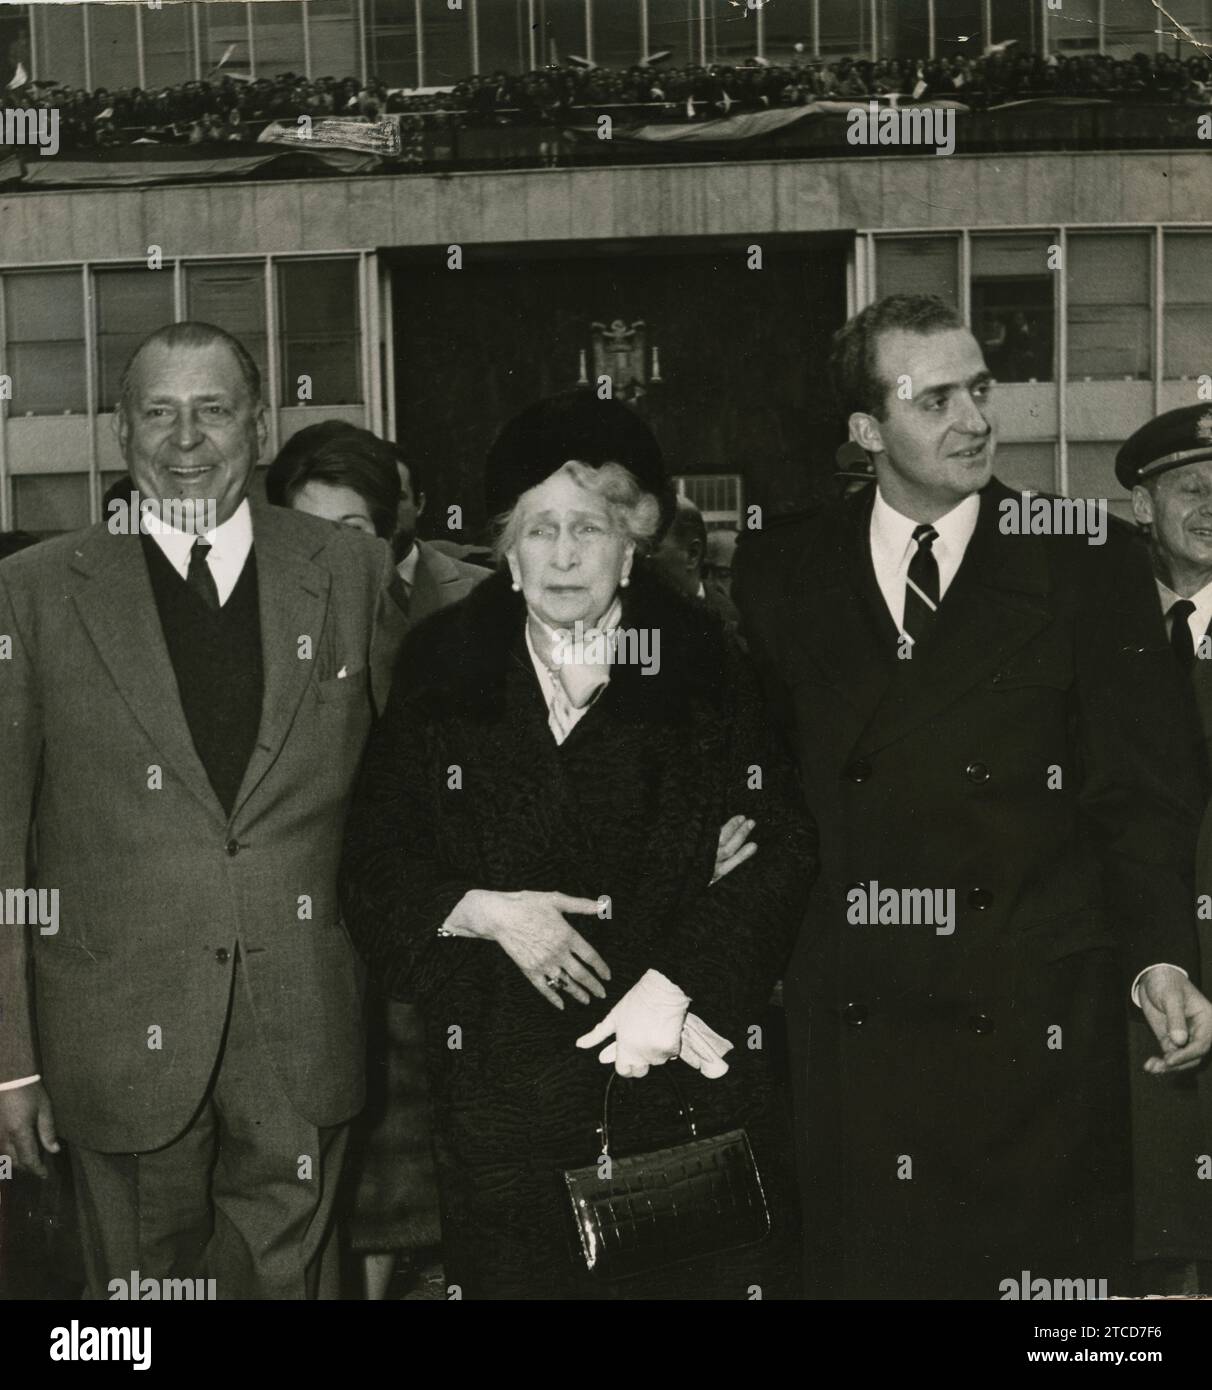 Madrid, 02/11/1968. Queen Victoria Eugenia visits Madrid on the occasion of the birth of her great-grandson, the Infante Don Felipe. In the image, farewell at Barajas Airport. With her, her son, Don Juan de Borbón, and her grandson, Prince Juan Carlos. Credit: Album / Archivo ABC / Teodoro Naranjo Domínguez Stock Photo